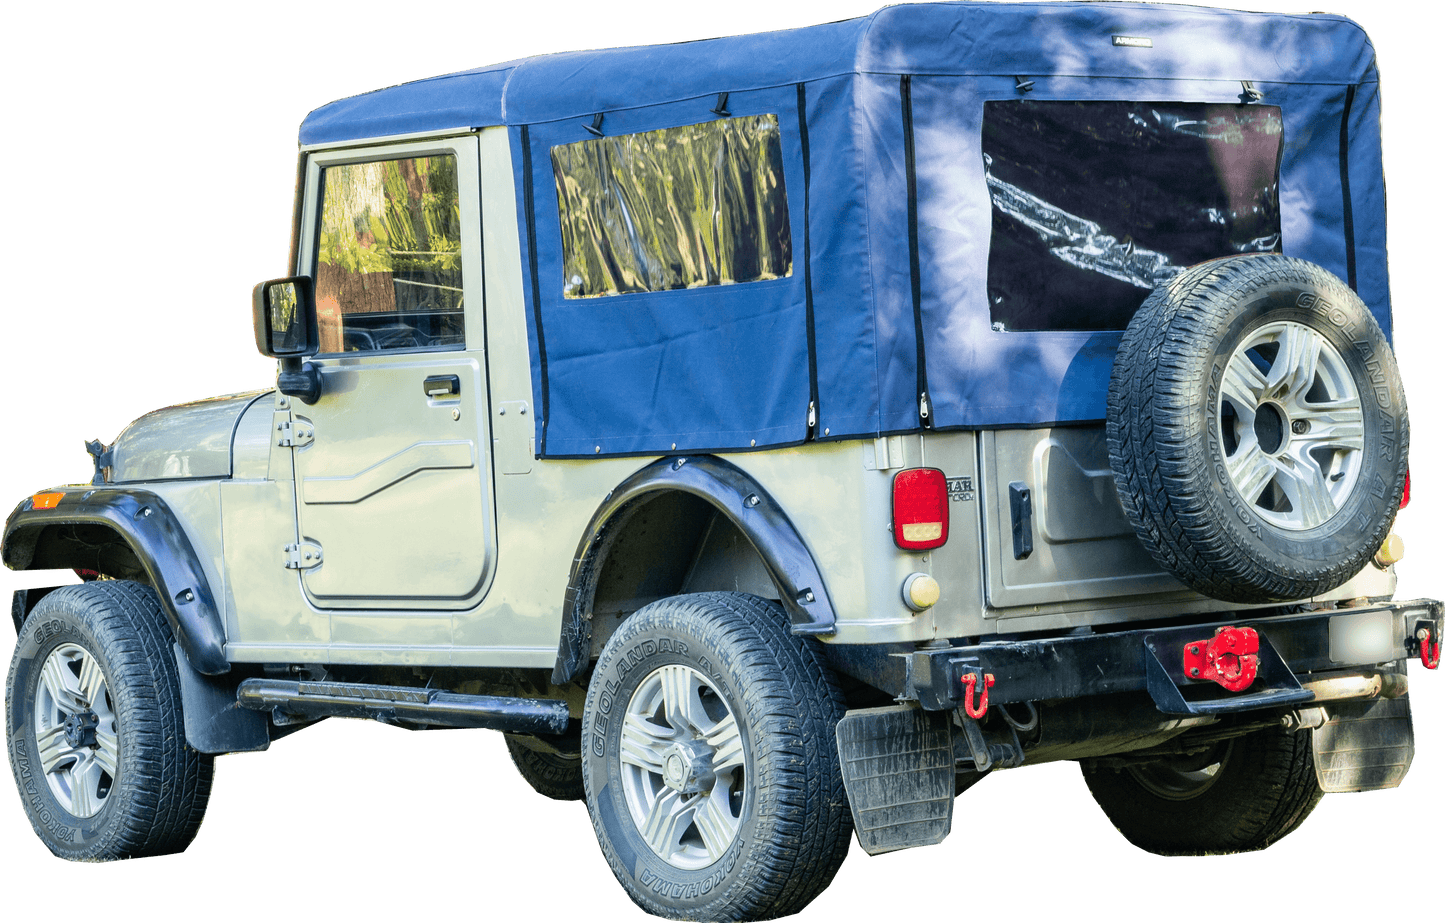 mahindra thar soft top cover price 